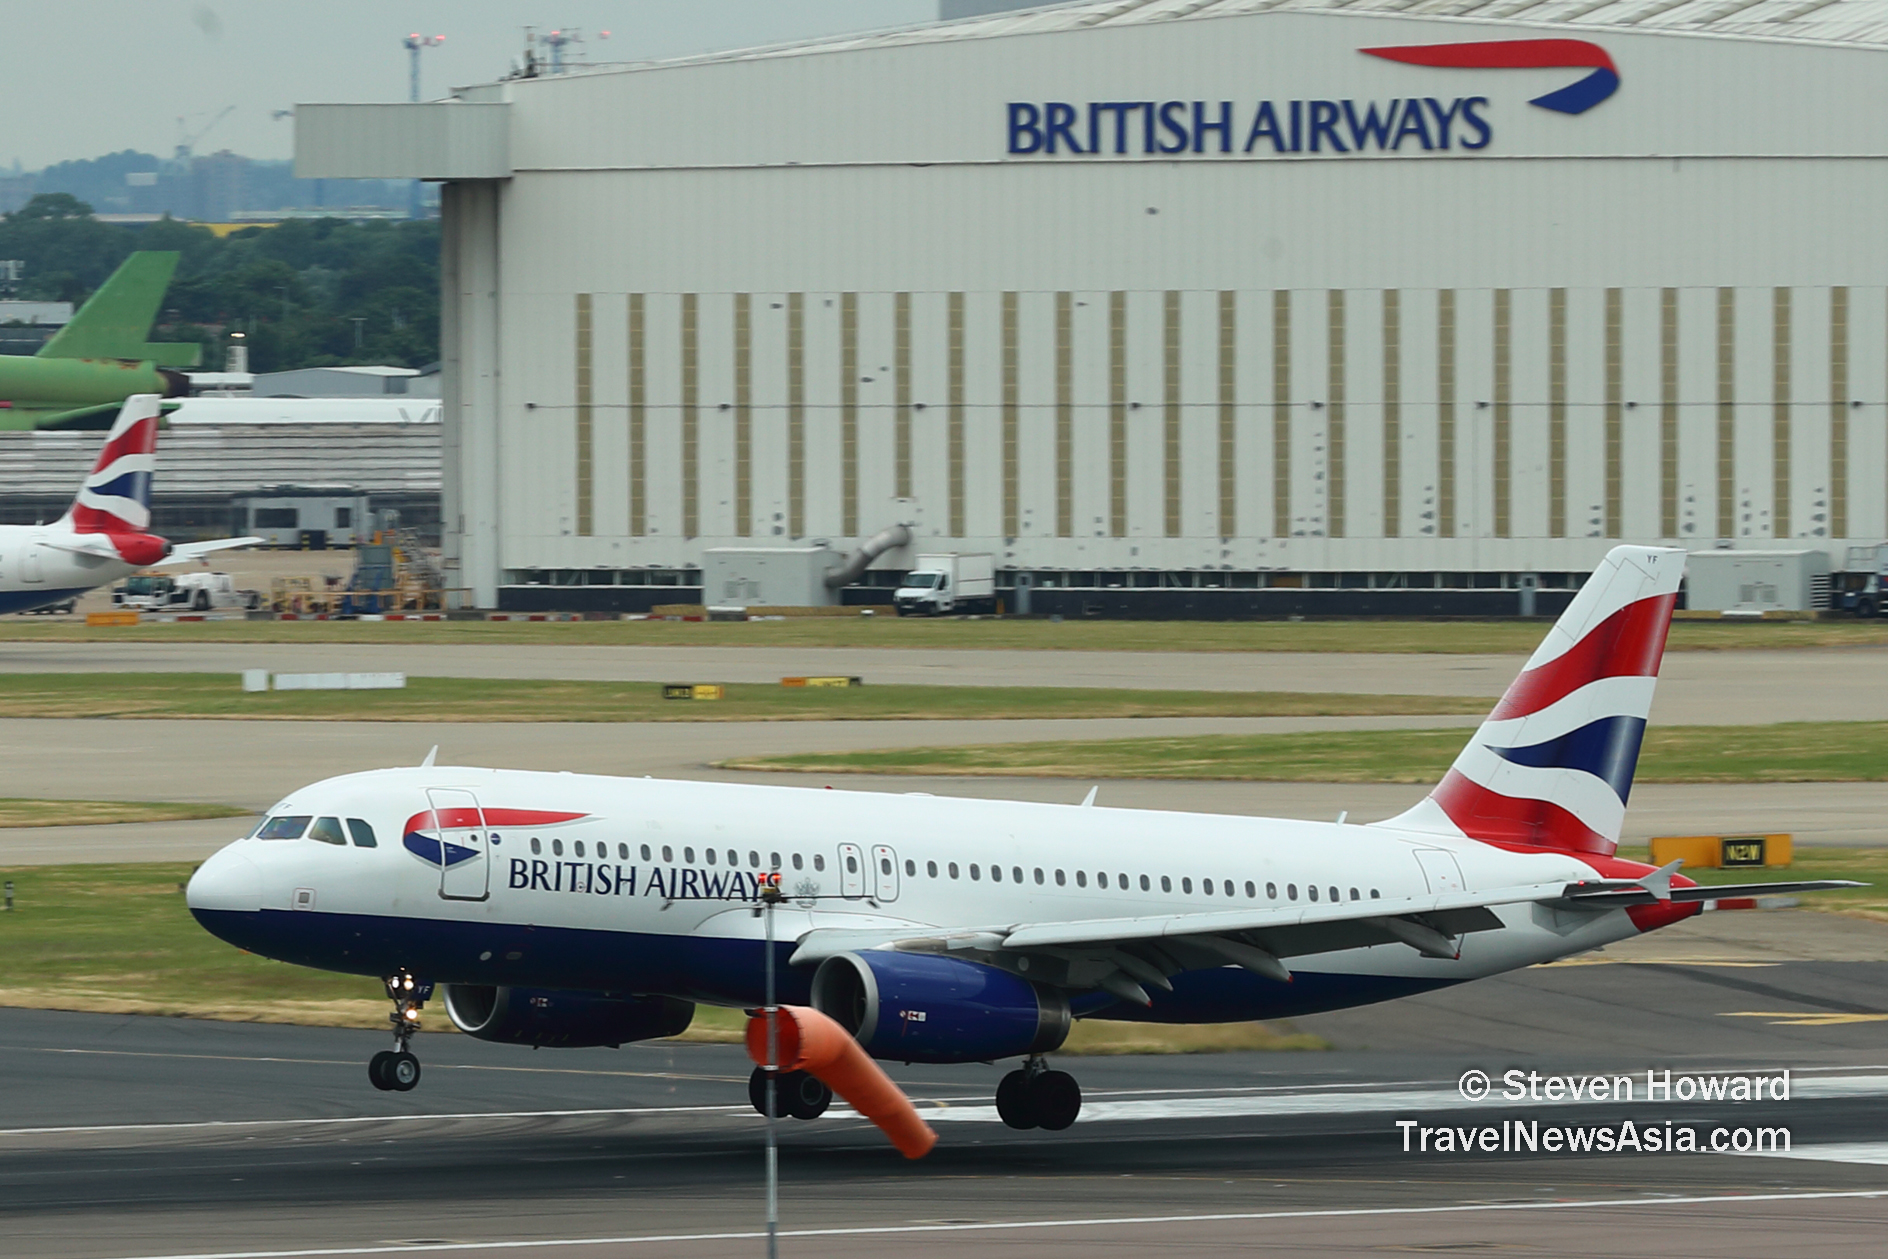 British Airways A320 landing at LHR in June 2023. Picture by Steven Howard of TravelNewsAsia.com Click to enlarge.